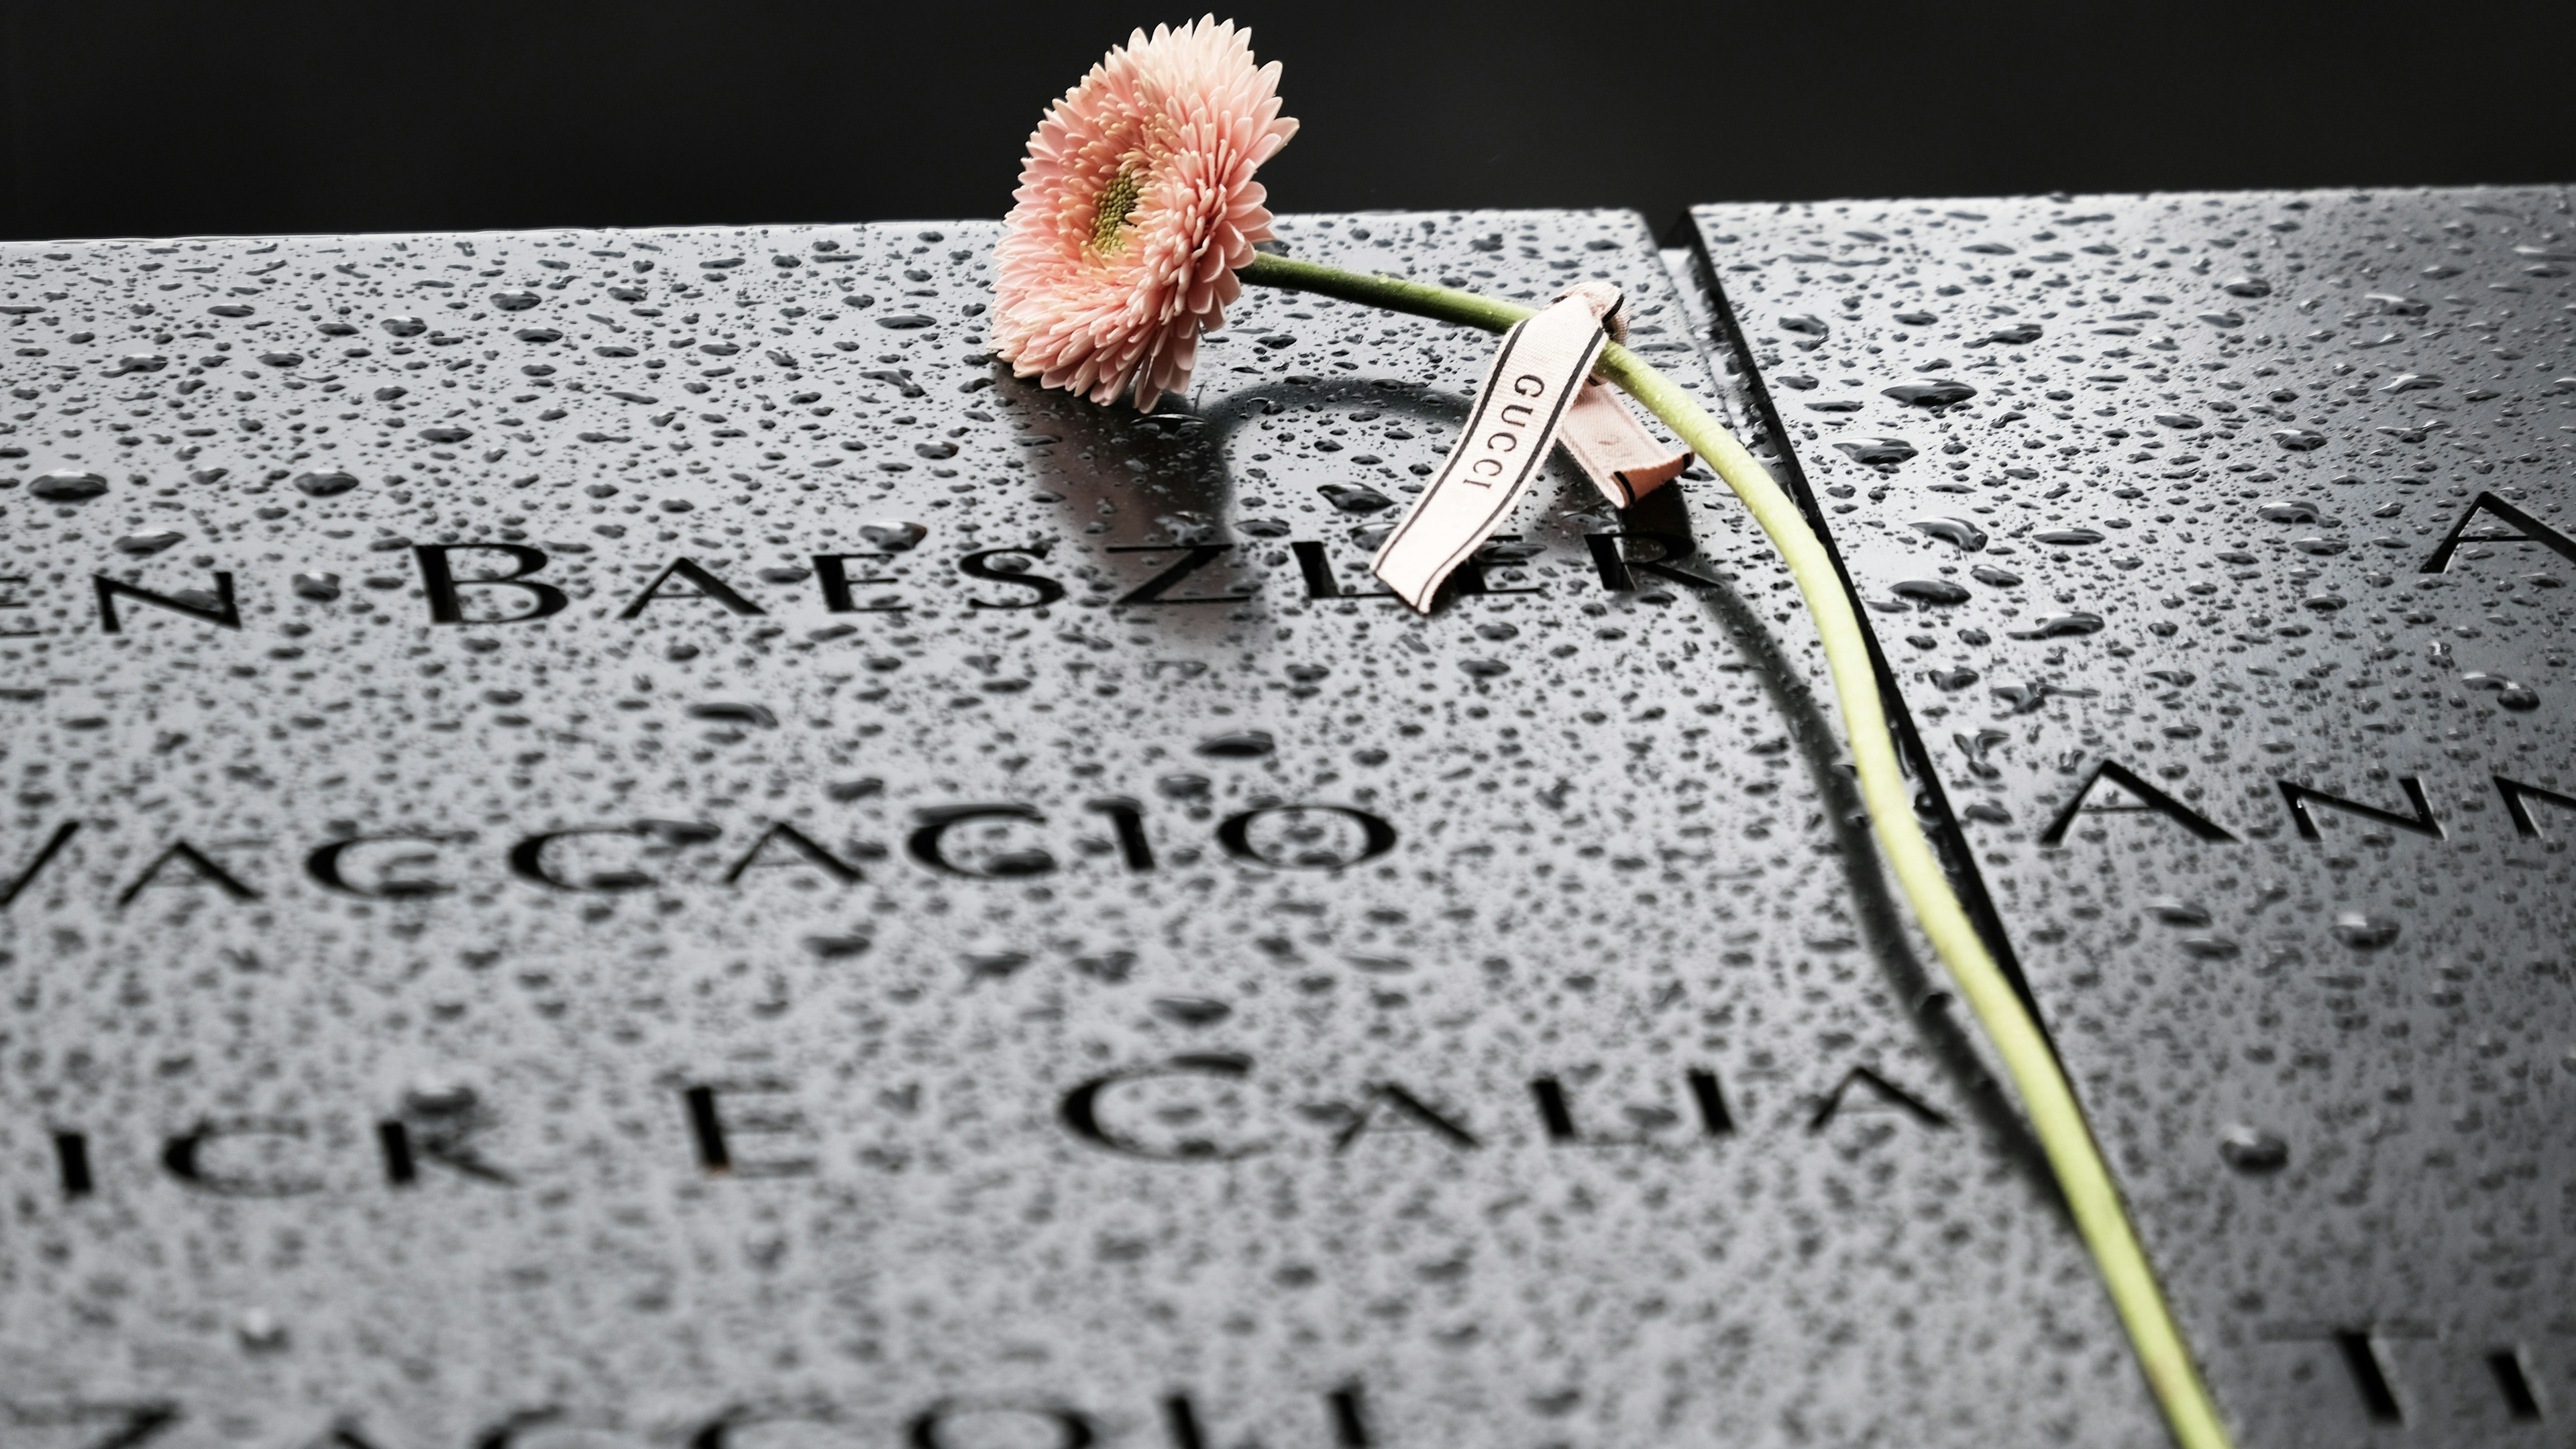 Flowers are placed over names at the September 11th Memorial on September 9, 2021 in New York City.